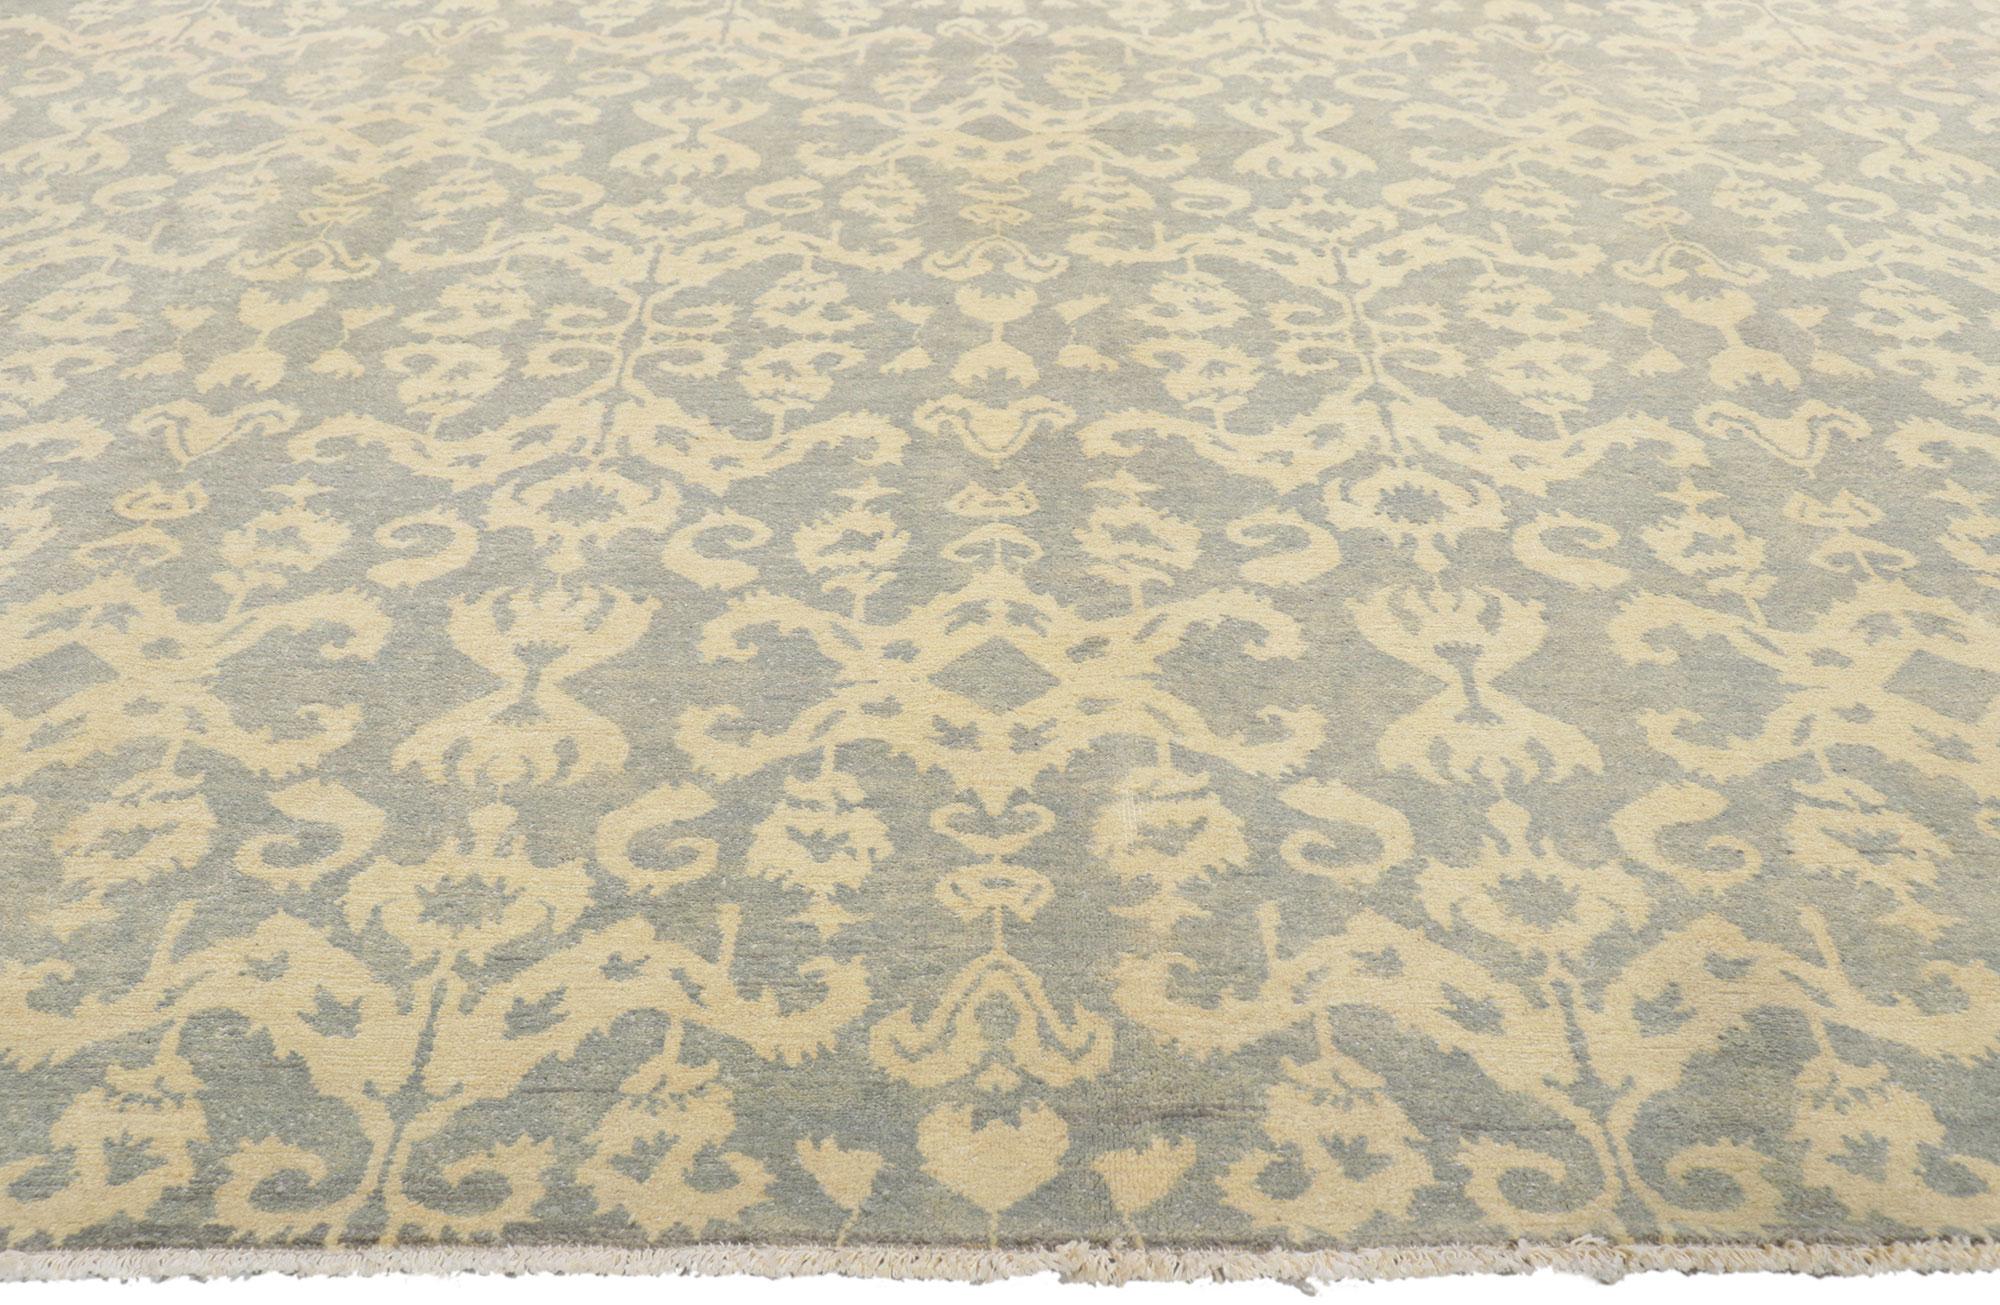 80256 New Transitional Ikat Rug, 08'00 X 10'02.
Emanating modern style with incredible detail and texture, this hand knotted wool Ikat rug from Pakistan is a captivating vision of woven beauty. The allover pattern and tranquil colorway woven into